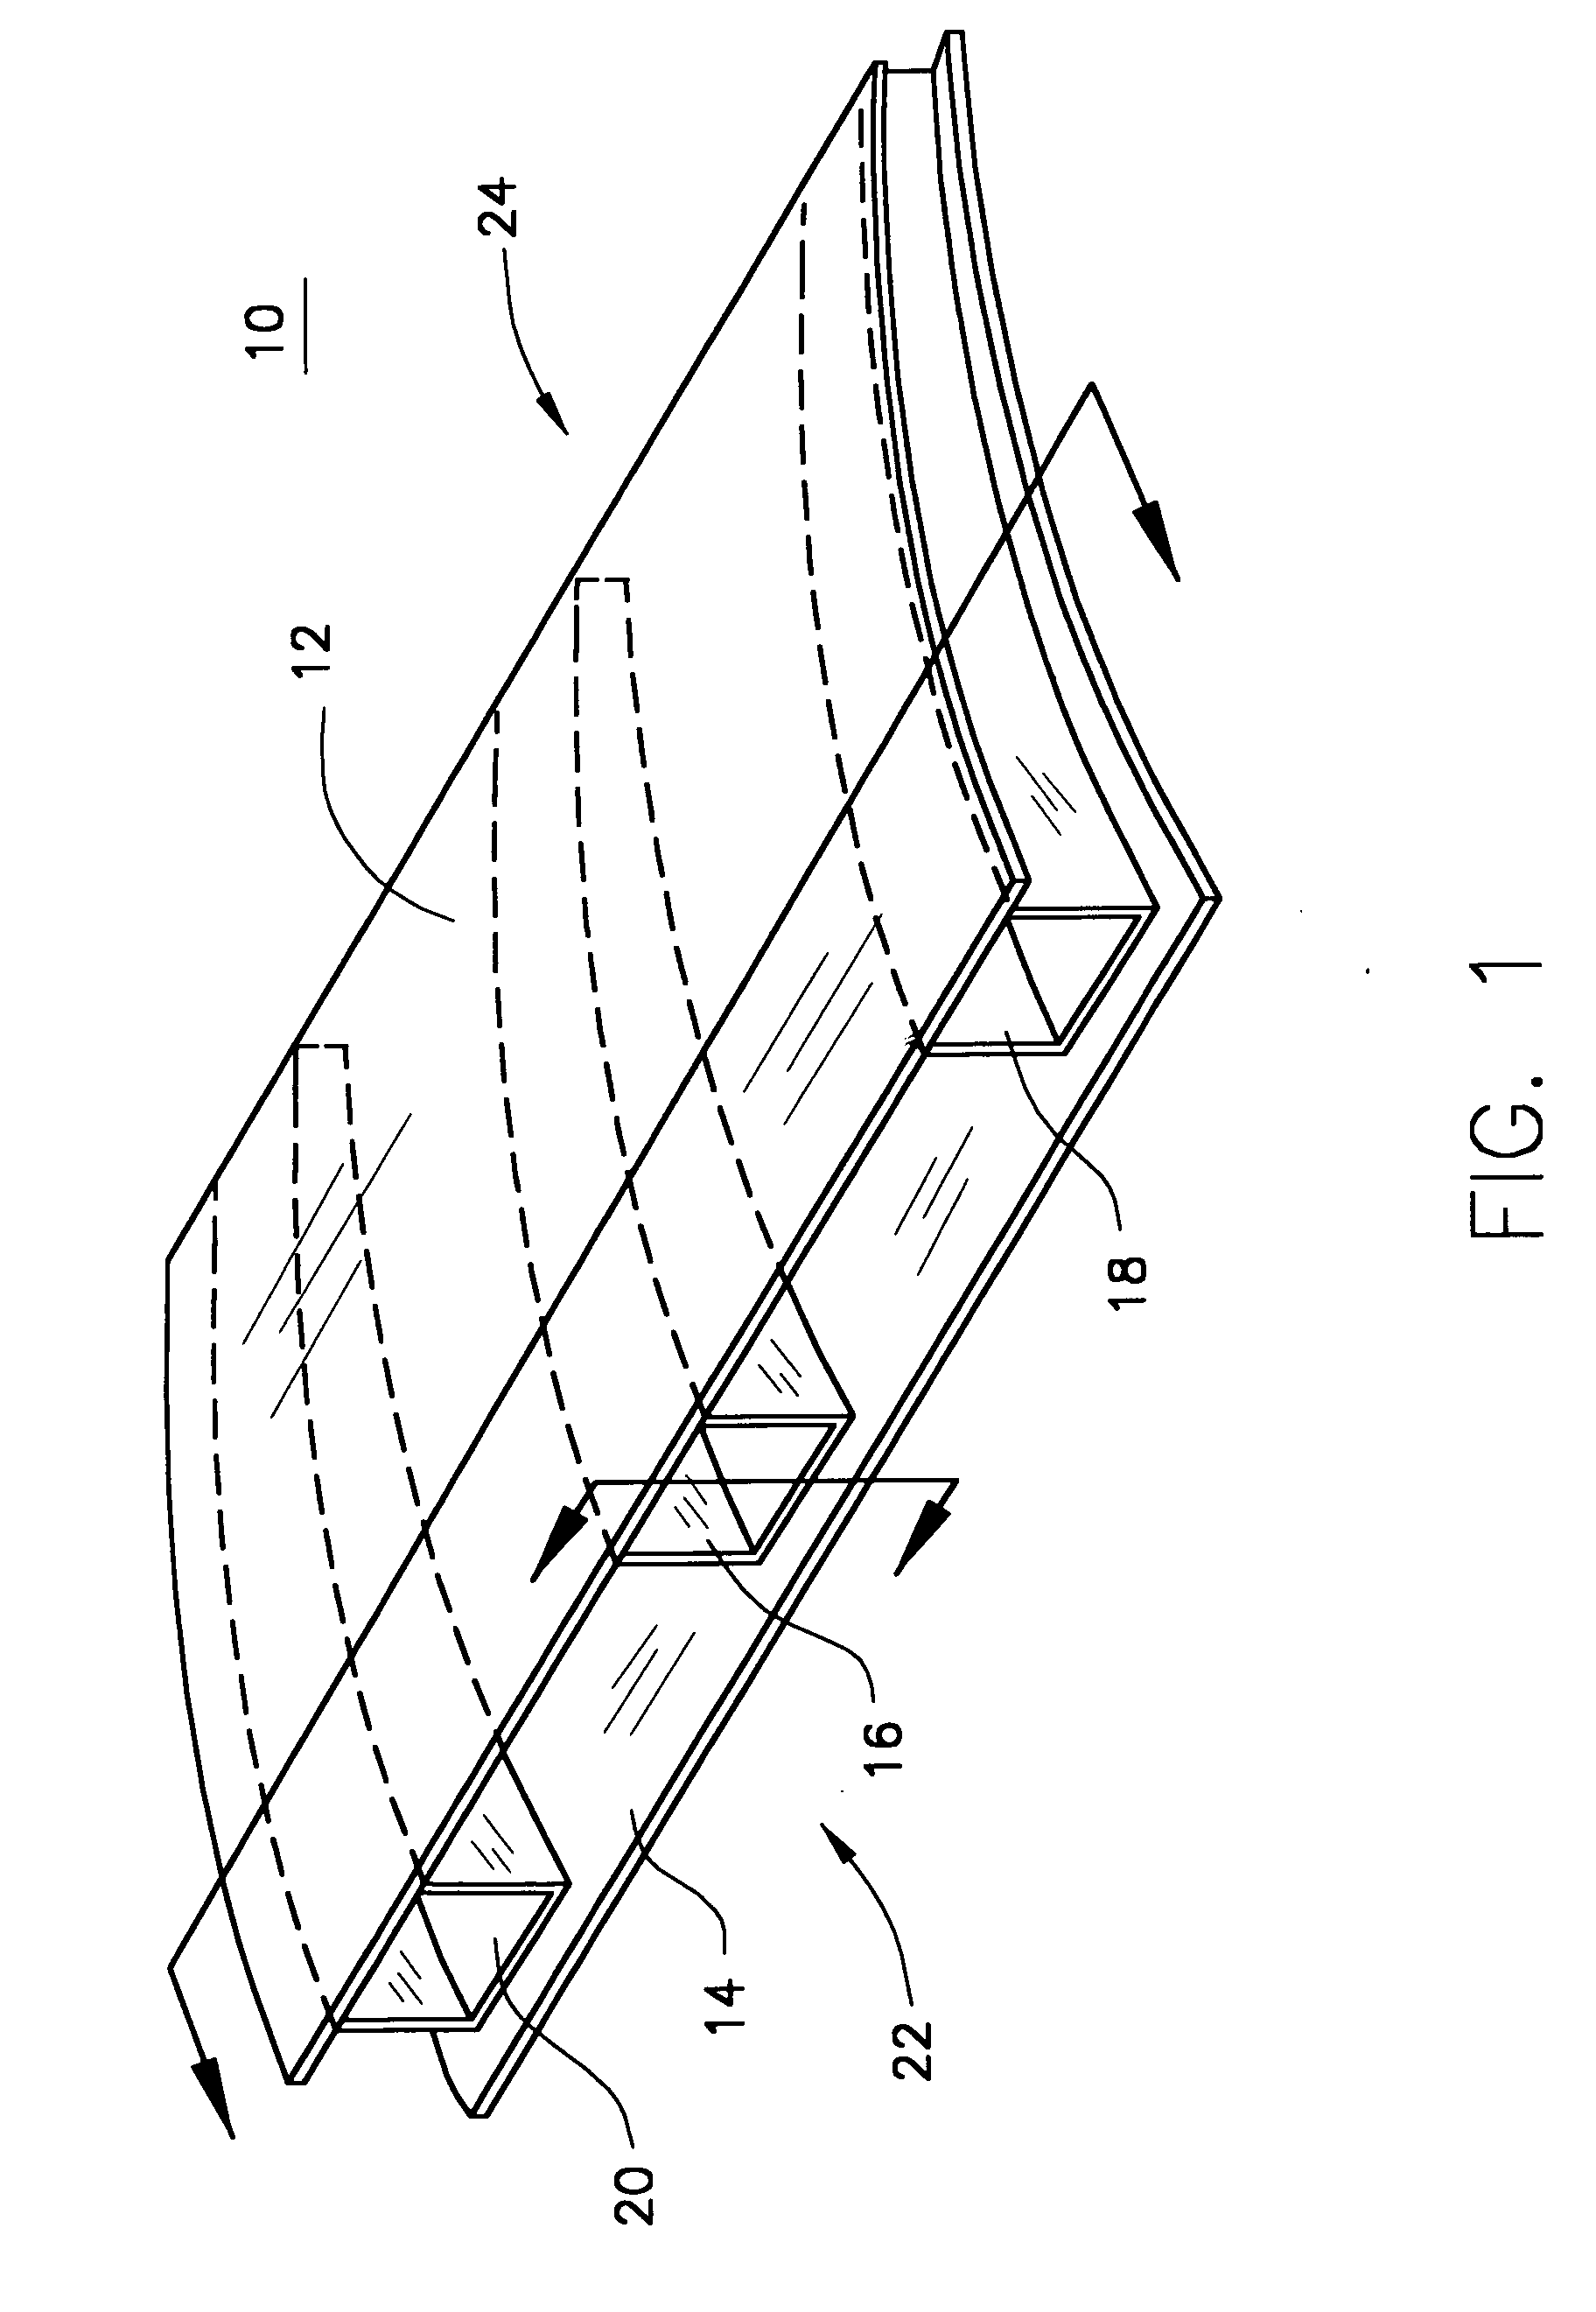 Advanced composite aerostructure article having a braided co-cured fly away hollow mandrel and method for fabrication